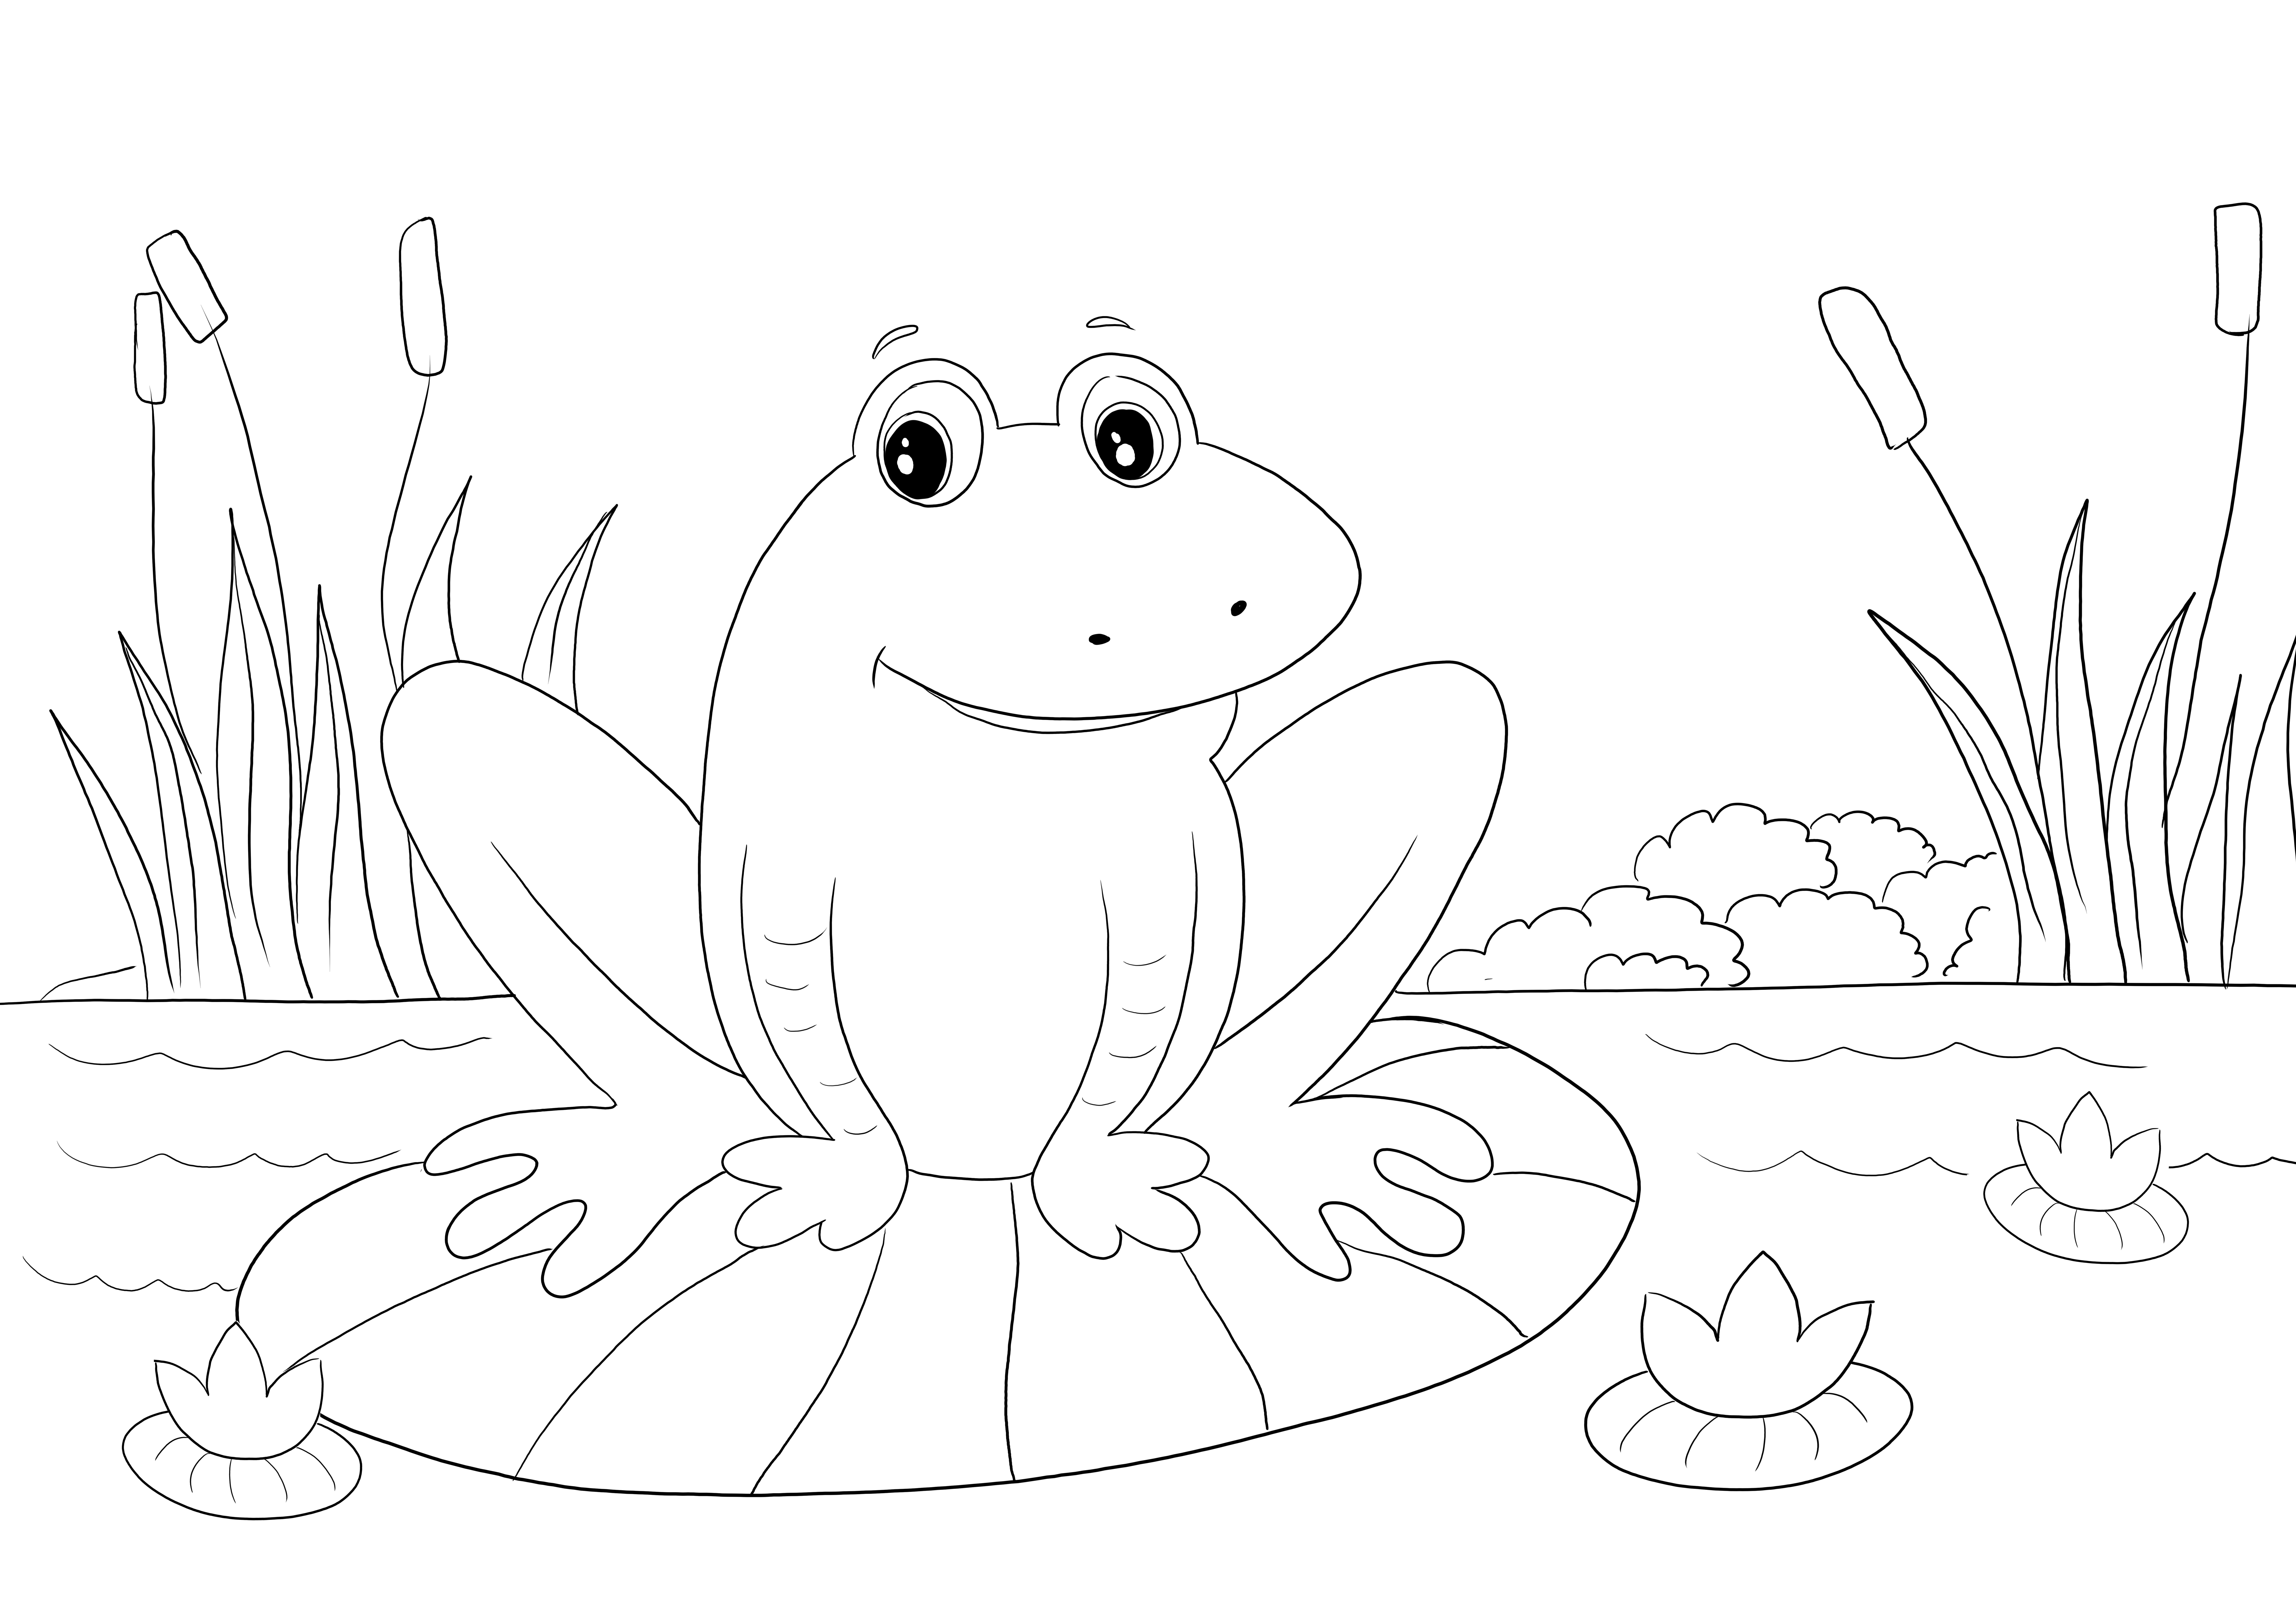 A cute and smiling frog coloring image free to download or print